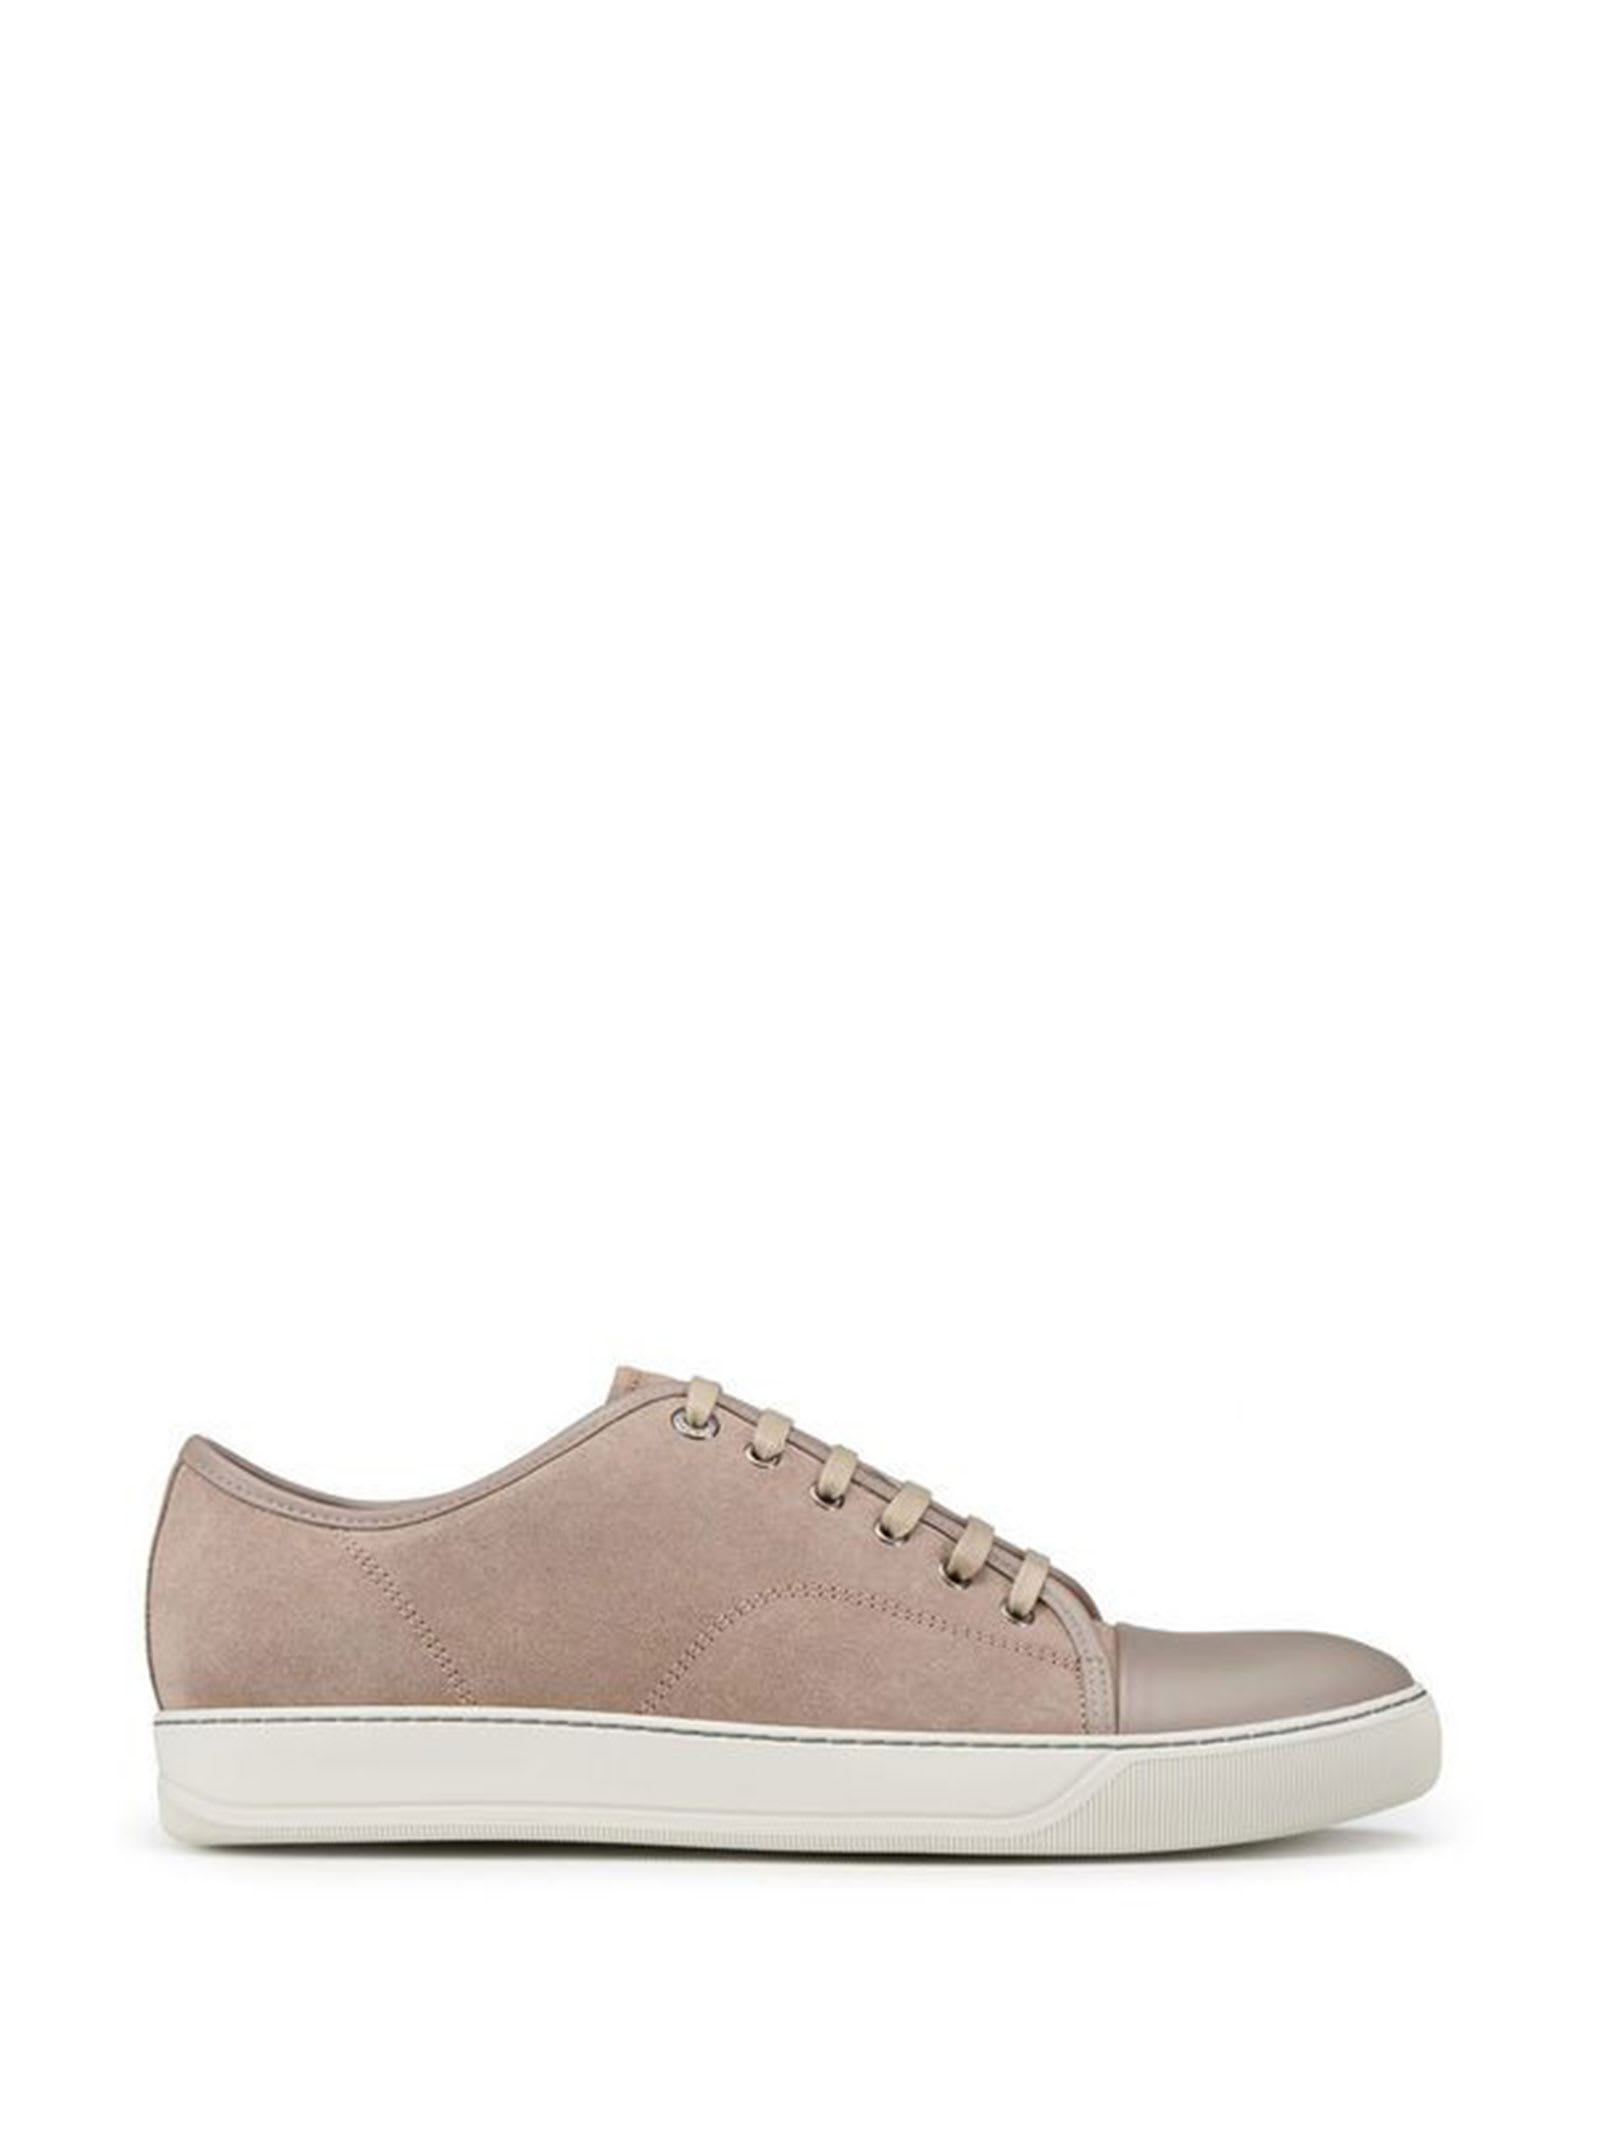 Lanvin Dbb1 Sneaker In Suede And Patent Leather